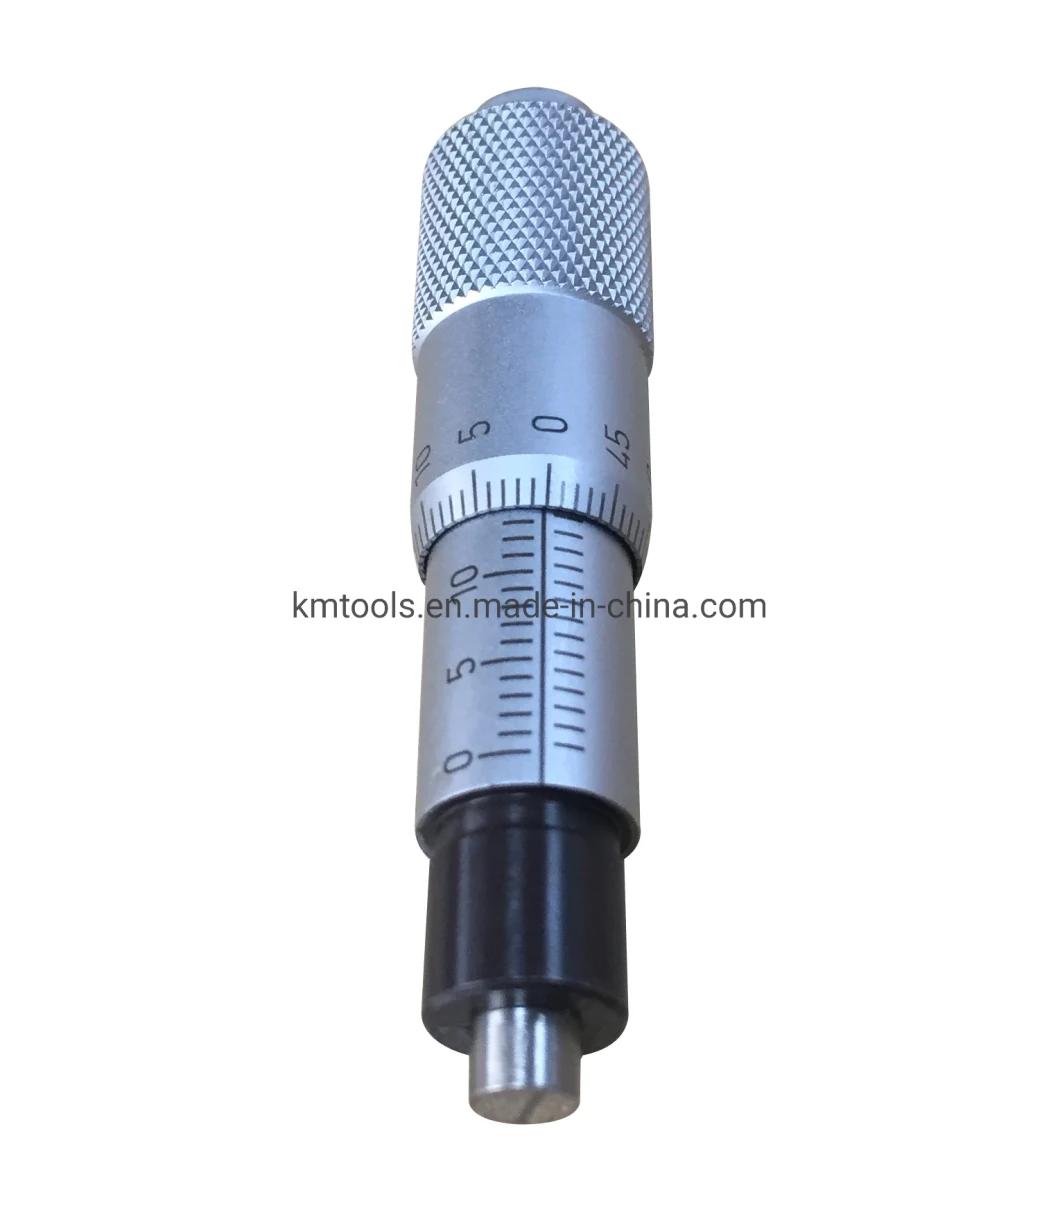 0-15mm Micrometer Head with 0.01mm Graduation